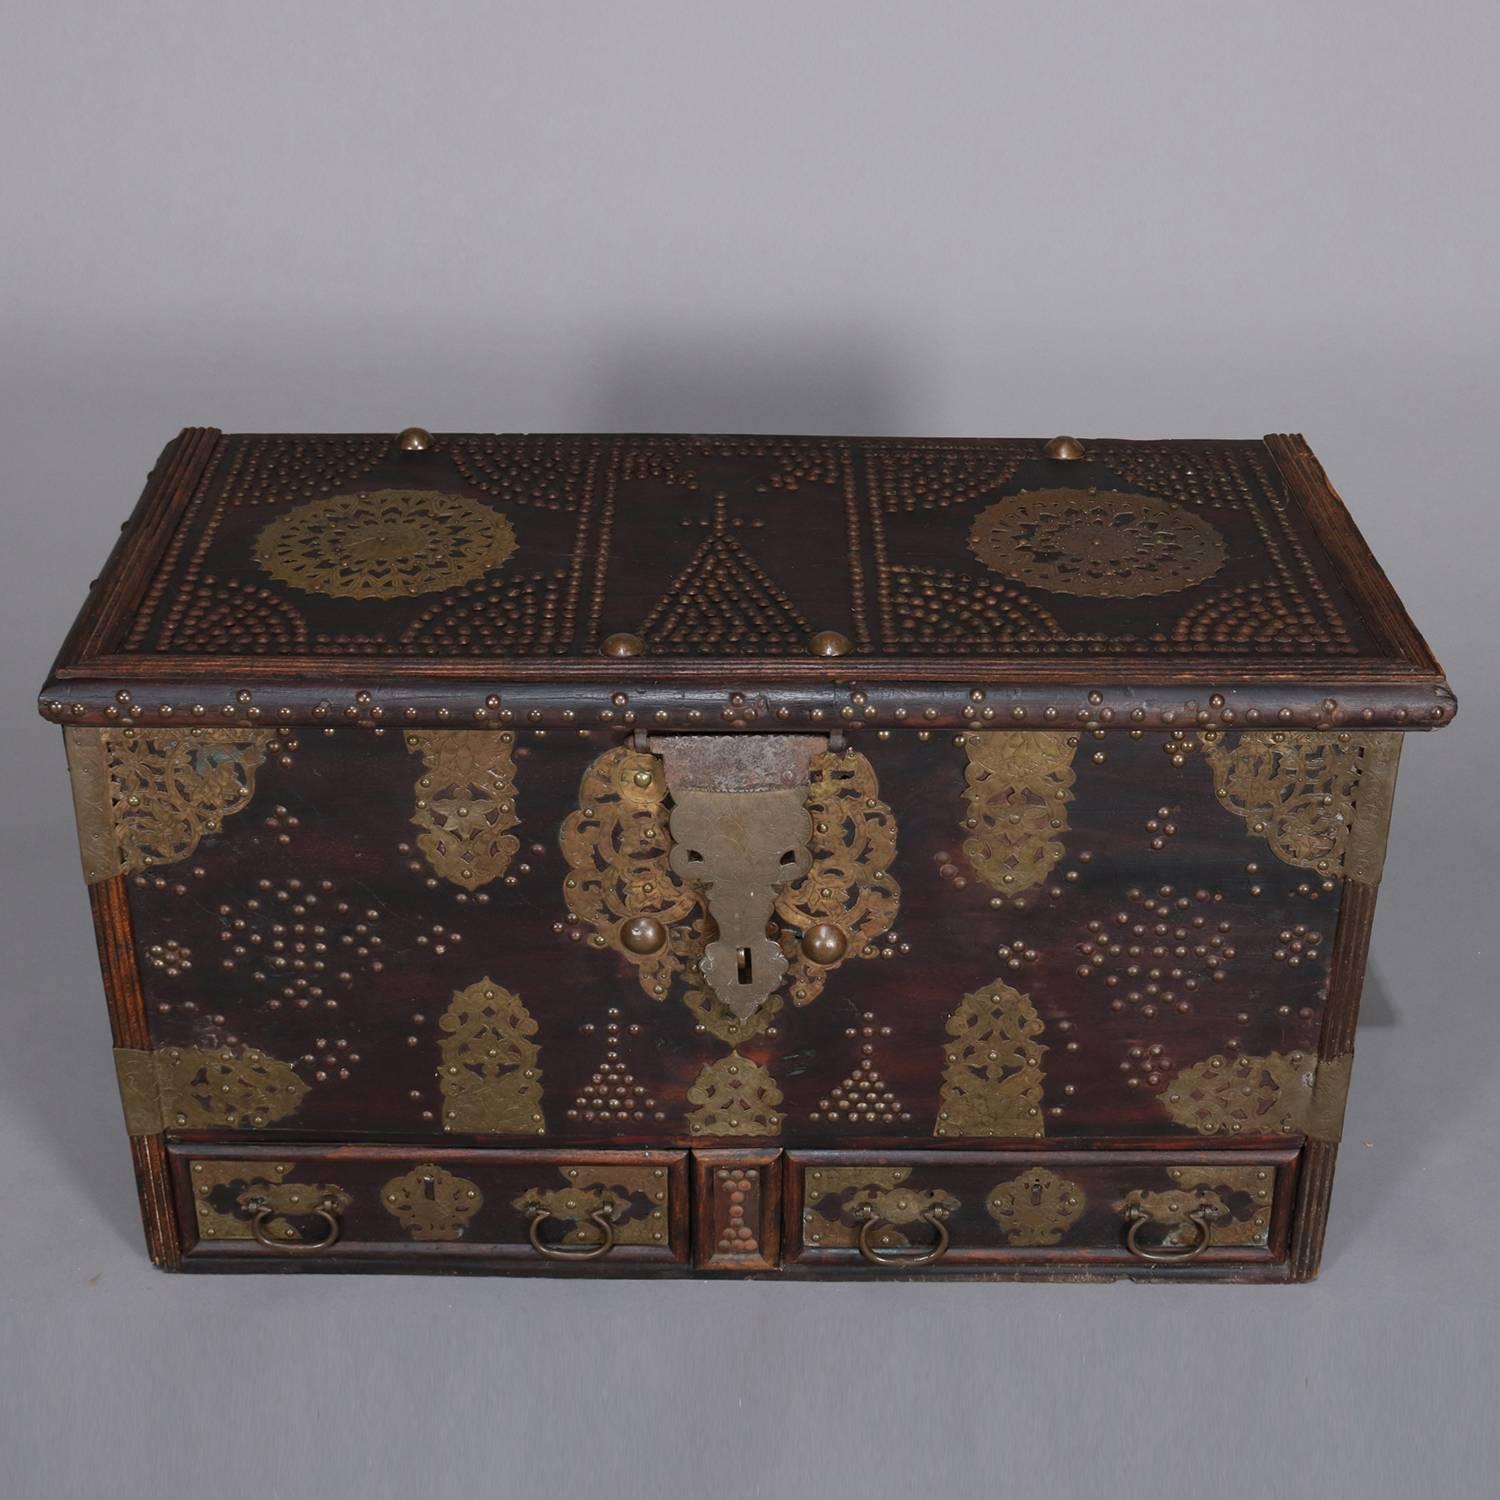 Antique Turkish marital bride's trunk features rosewood construction with two lower drawers and interior patch box; floral pierced and embossed brass reserves, straps, hinges, handles and hasp; patterned design in brass tacks including church or